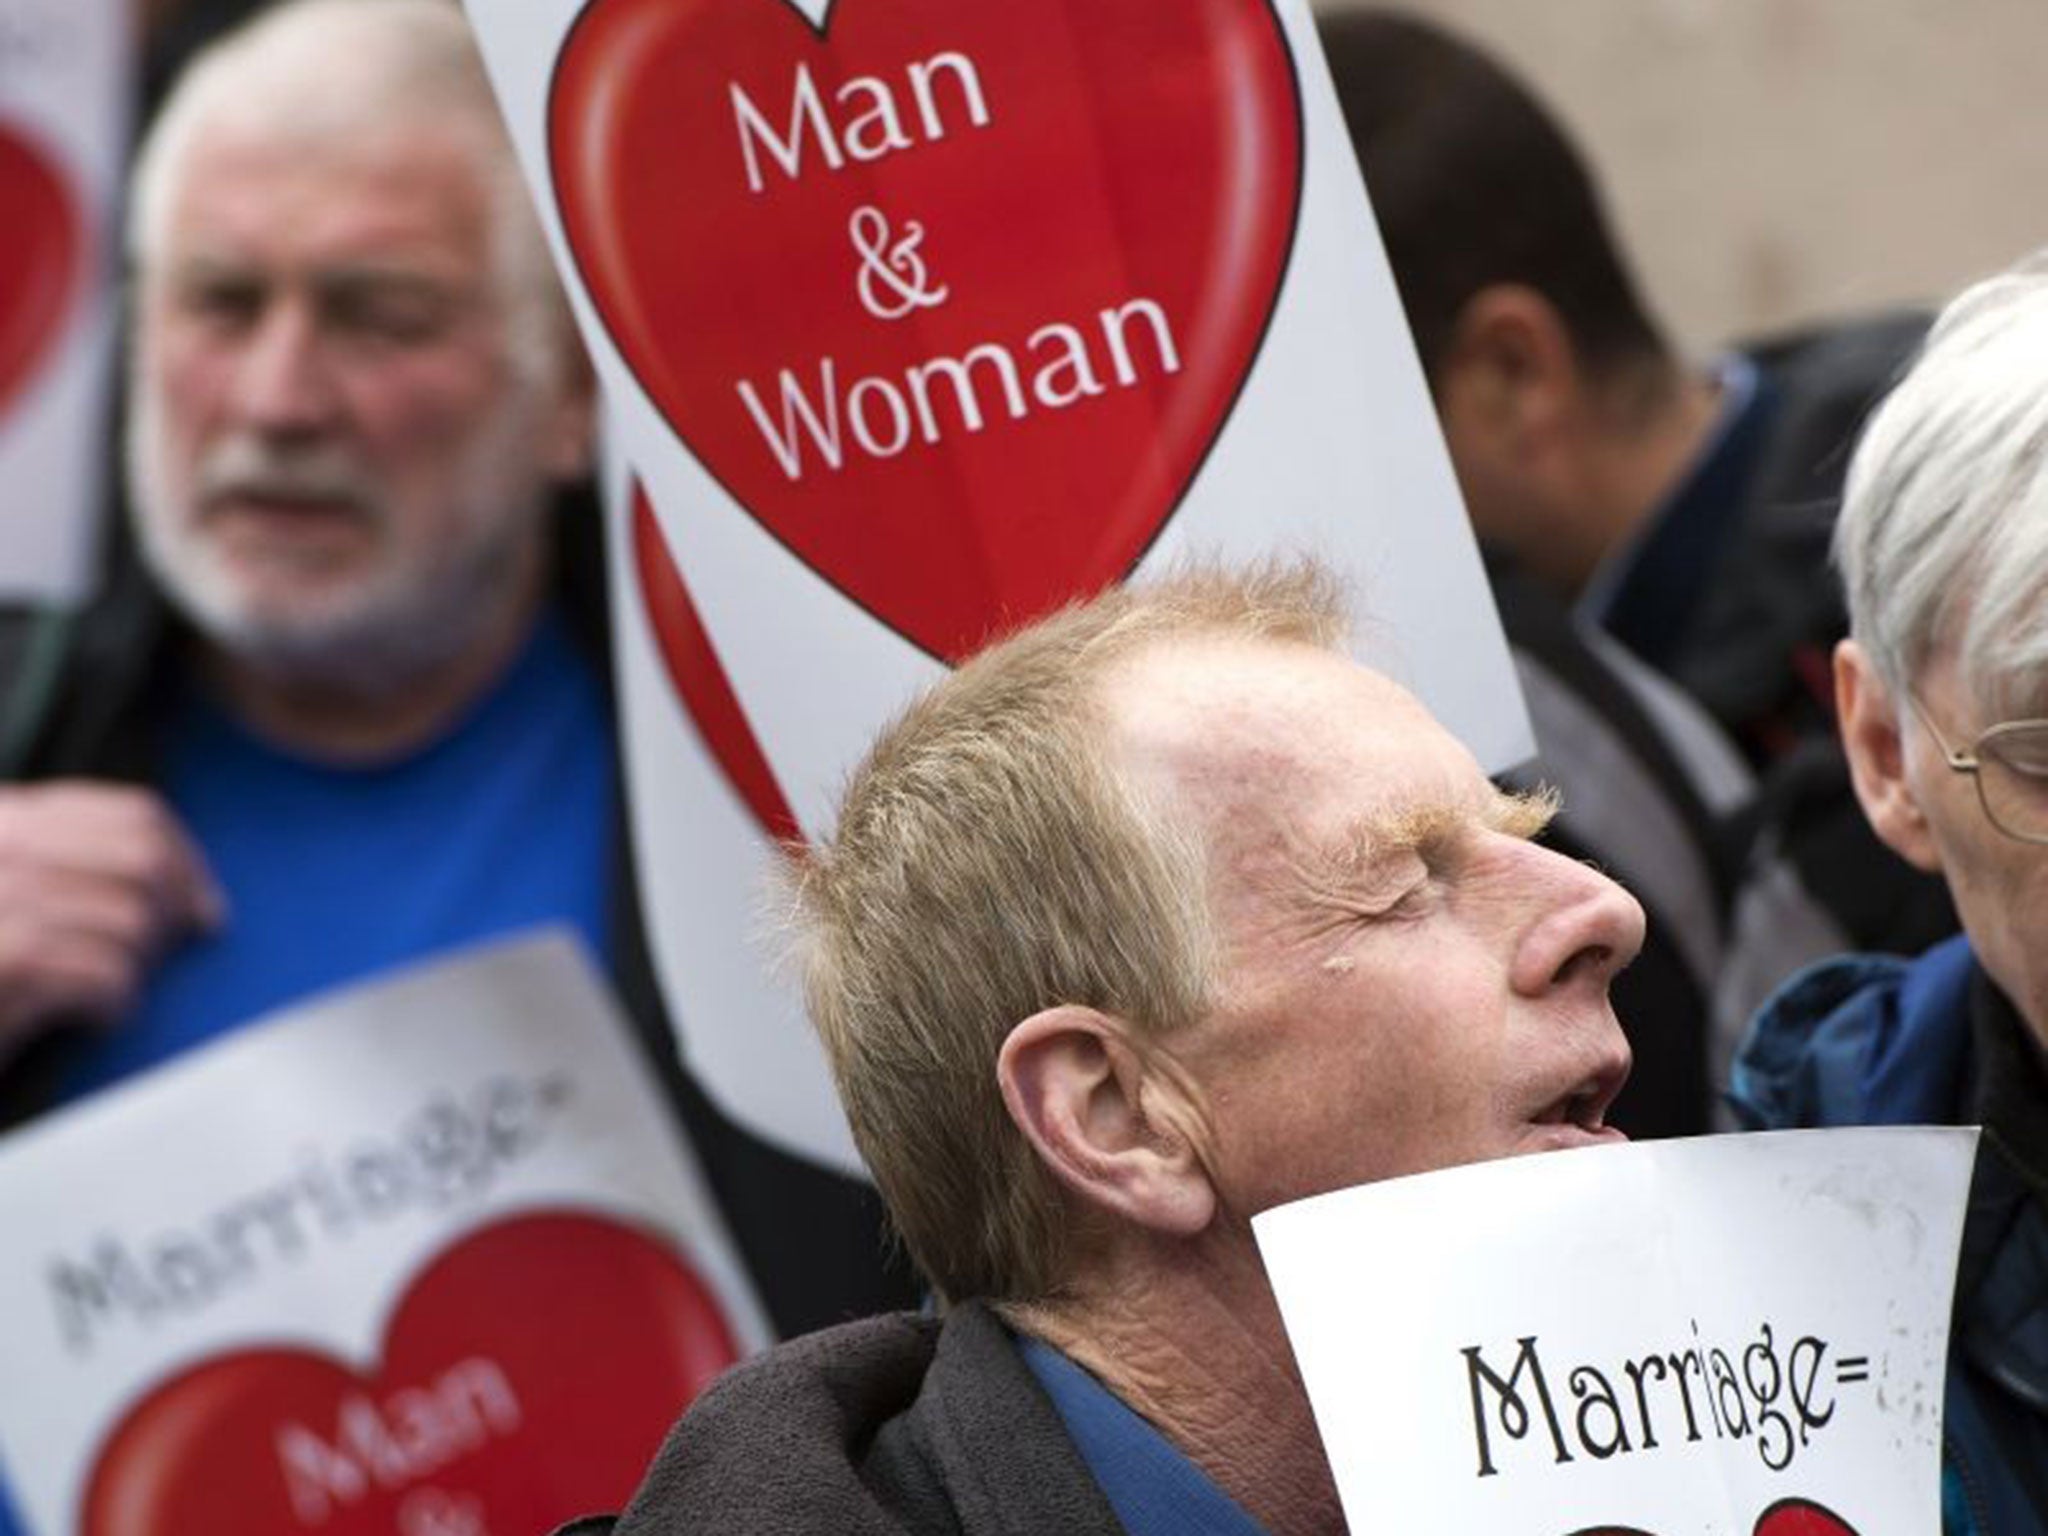 Anti-gay marriage protesters outside Parliament on 21 May 2013